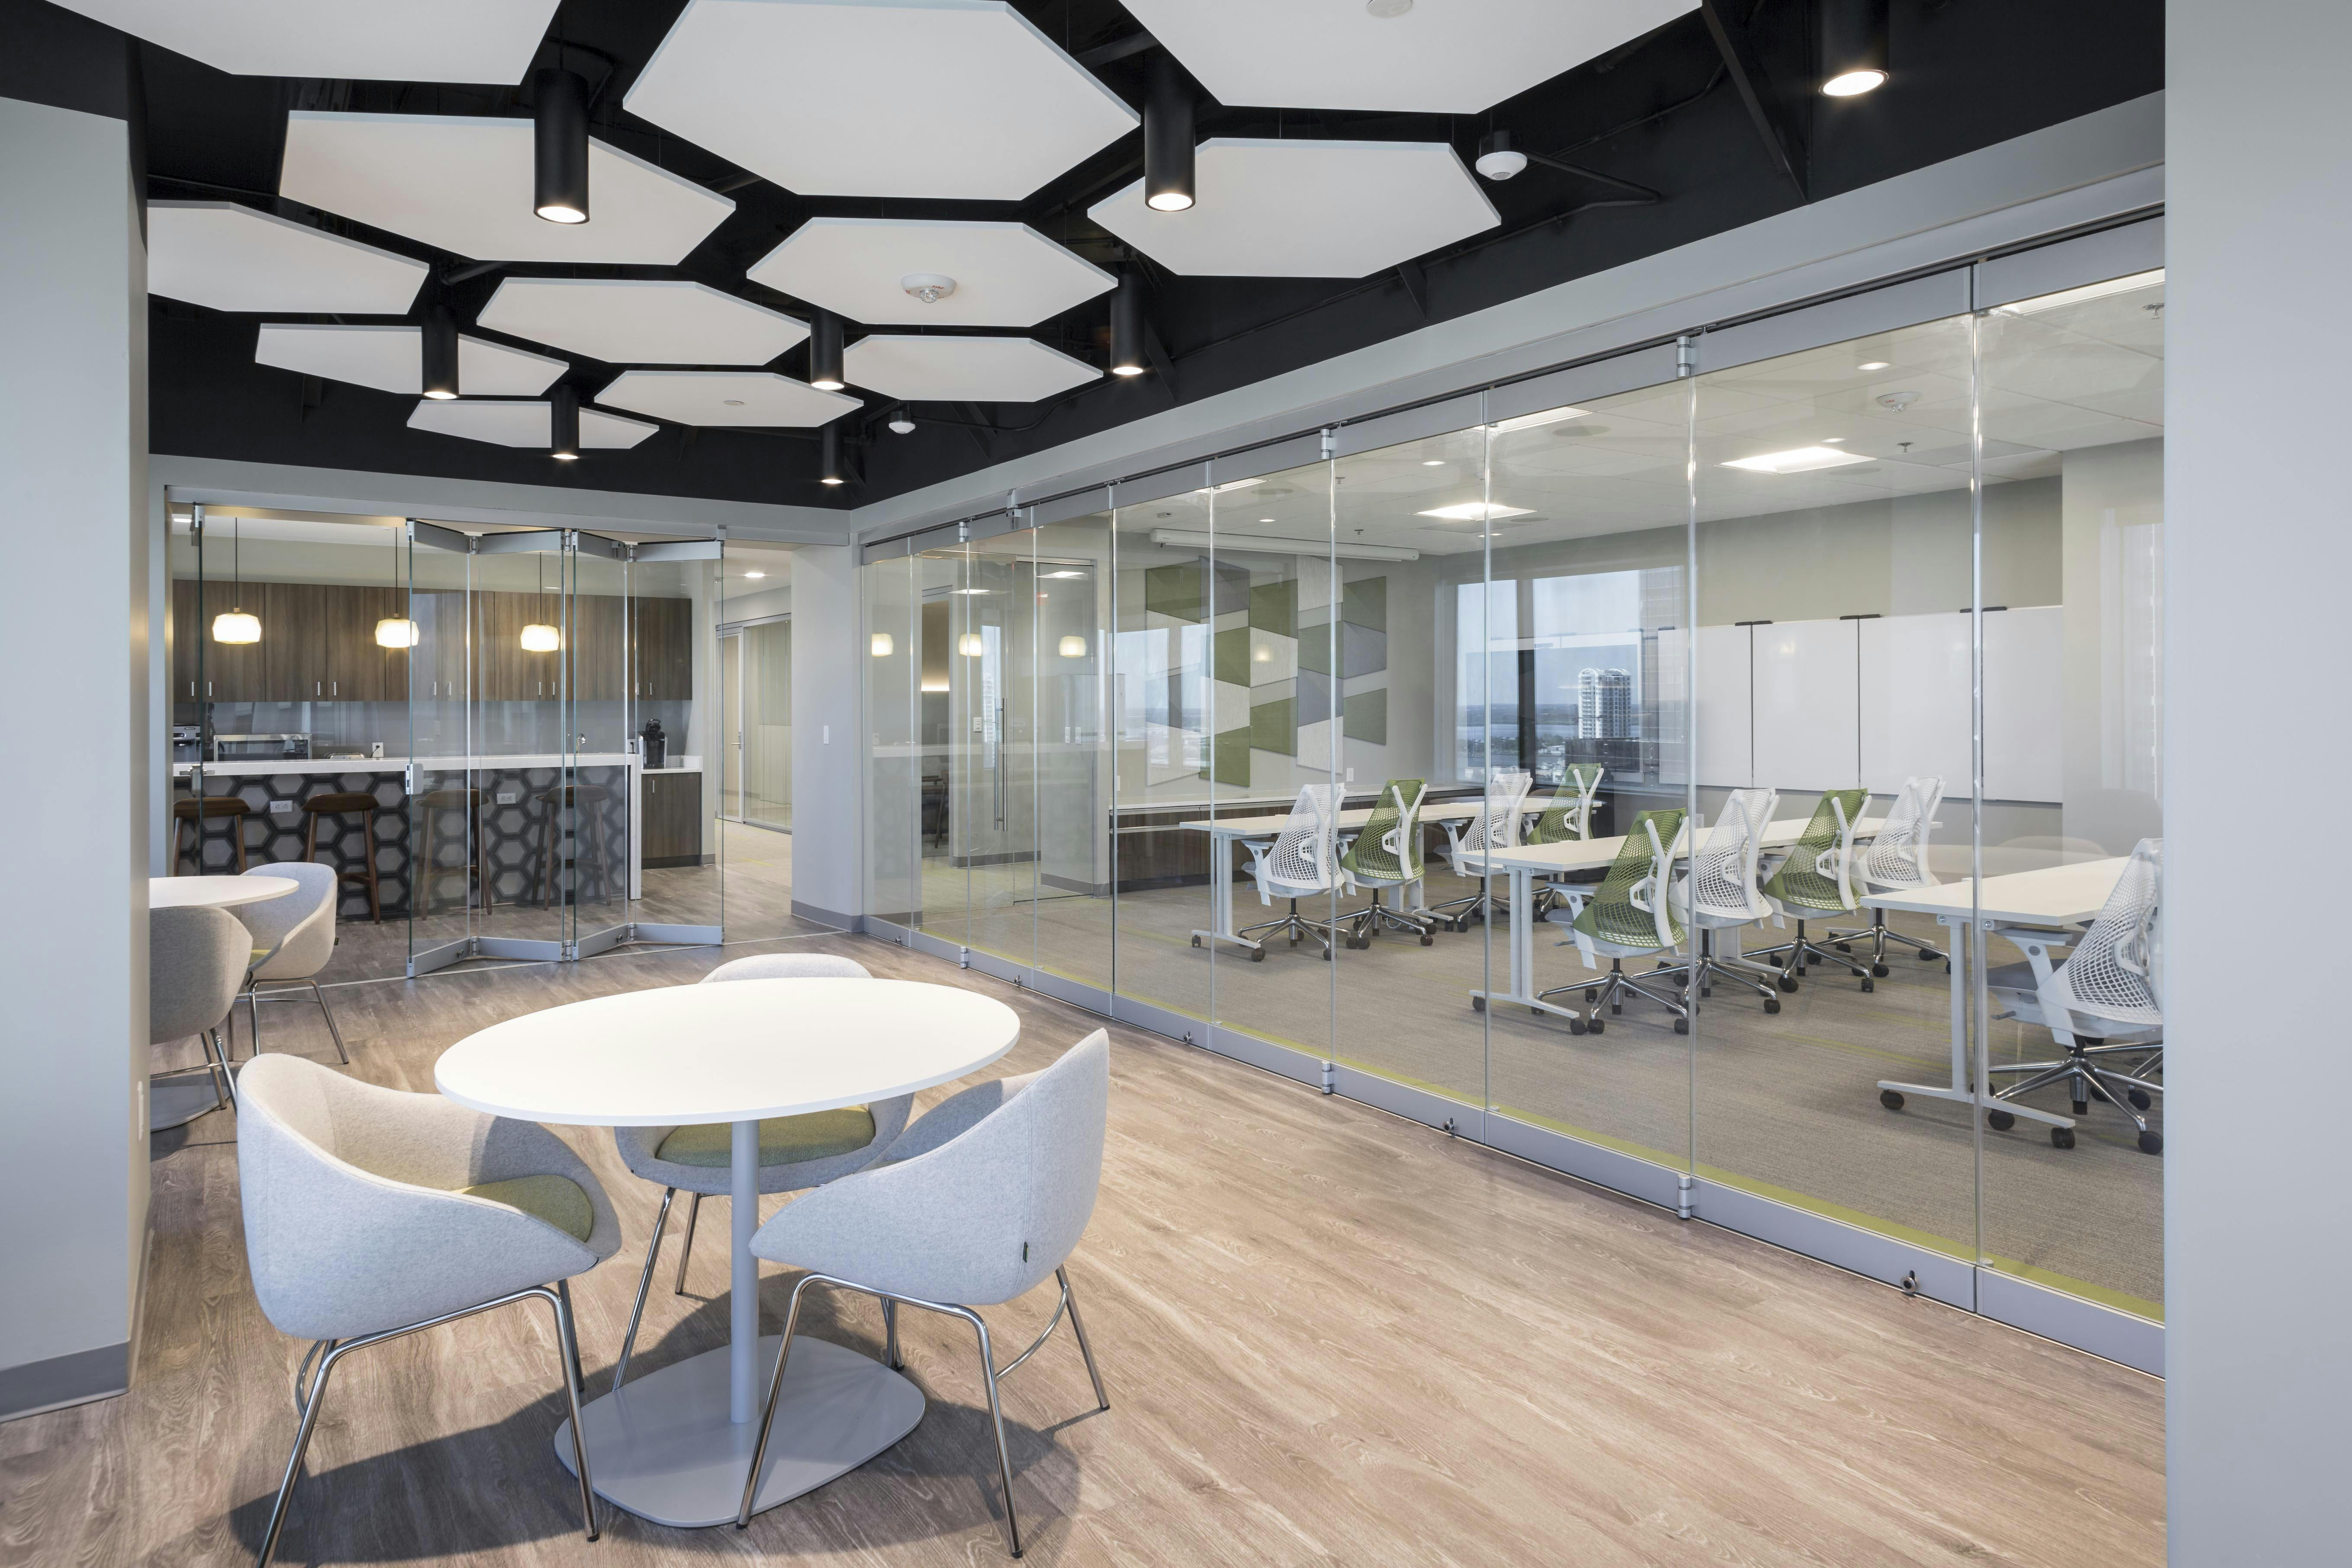 NanaWall Folding glass doors in space-efficient workplace design